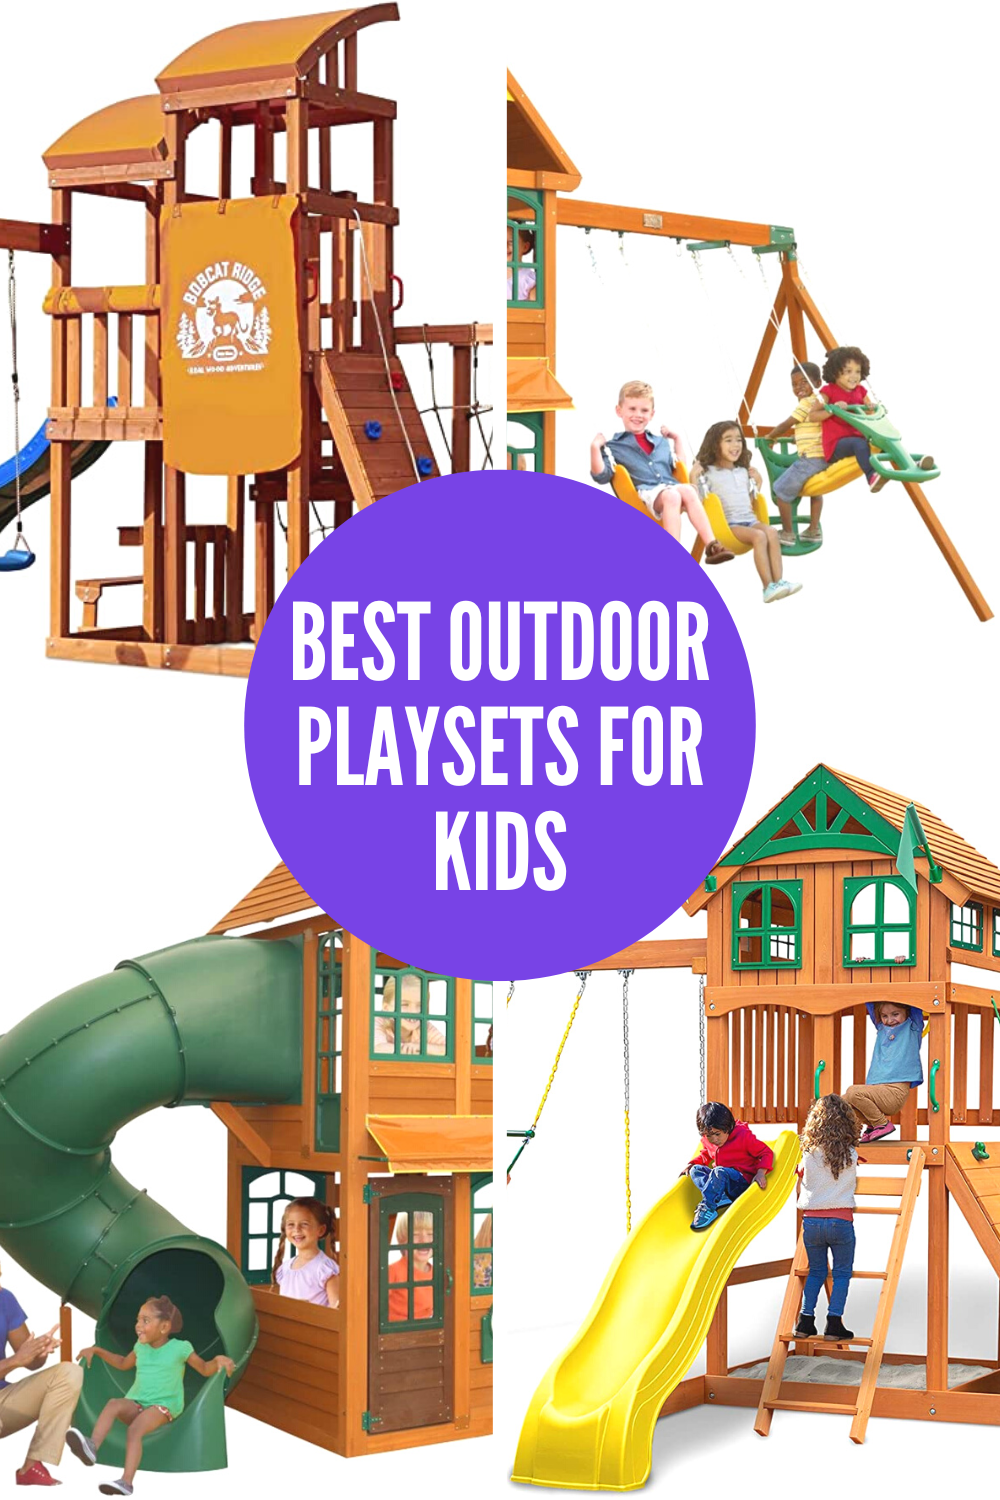 Best Outdoor Playsets for Kids